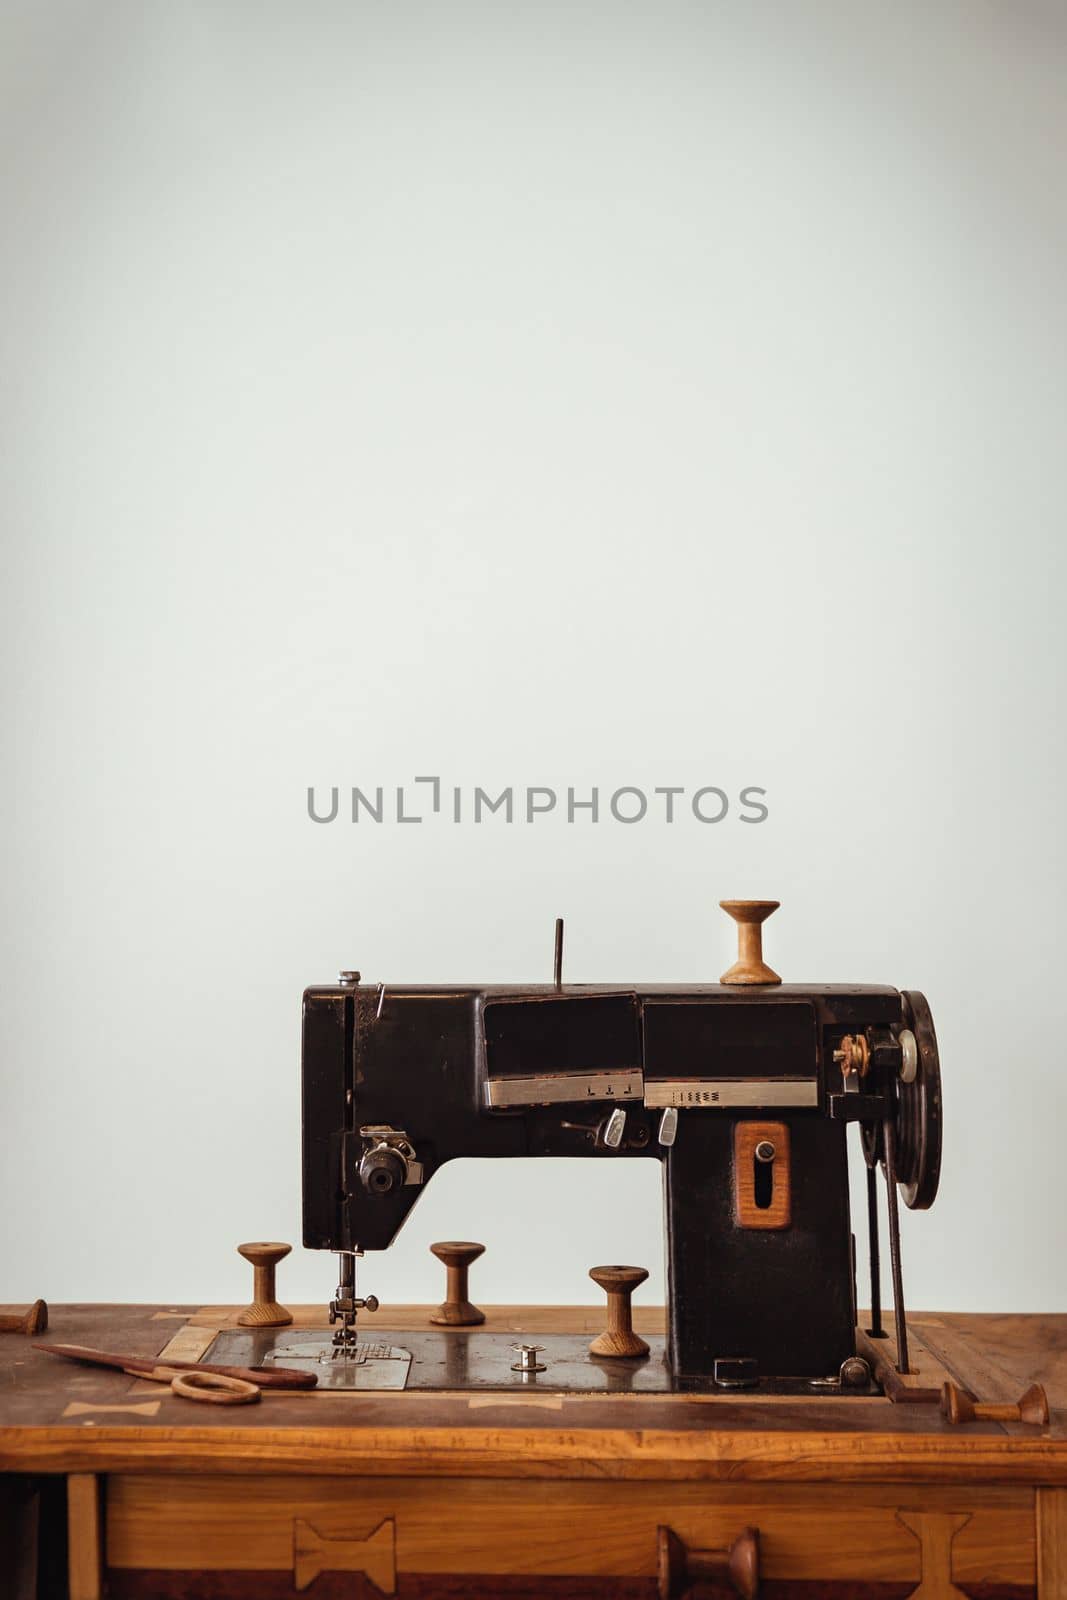 Old vintage sewing machine on wooden table on white wall background. Copy space, Selective focus.